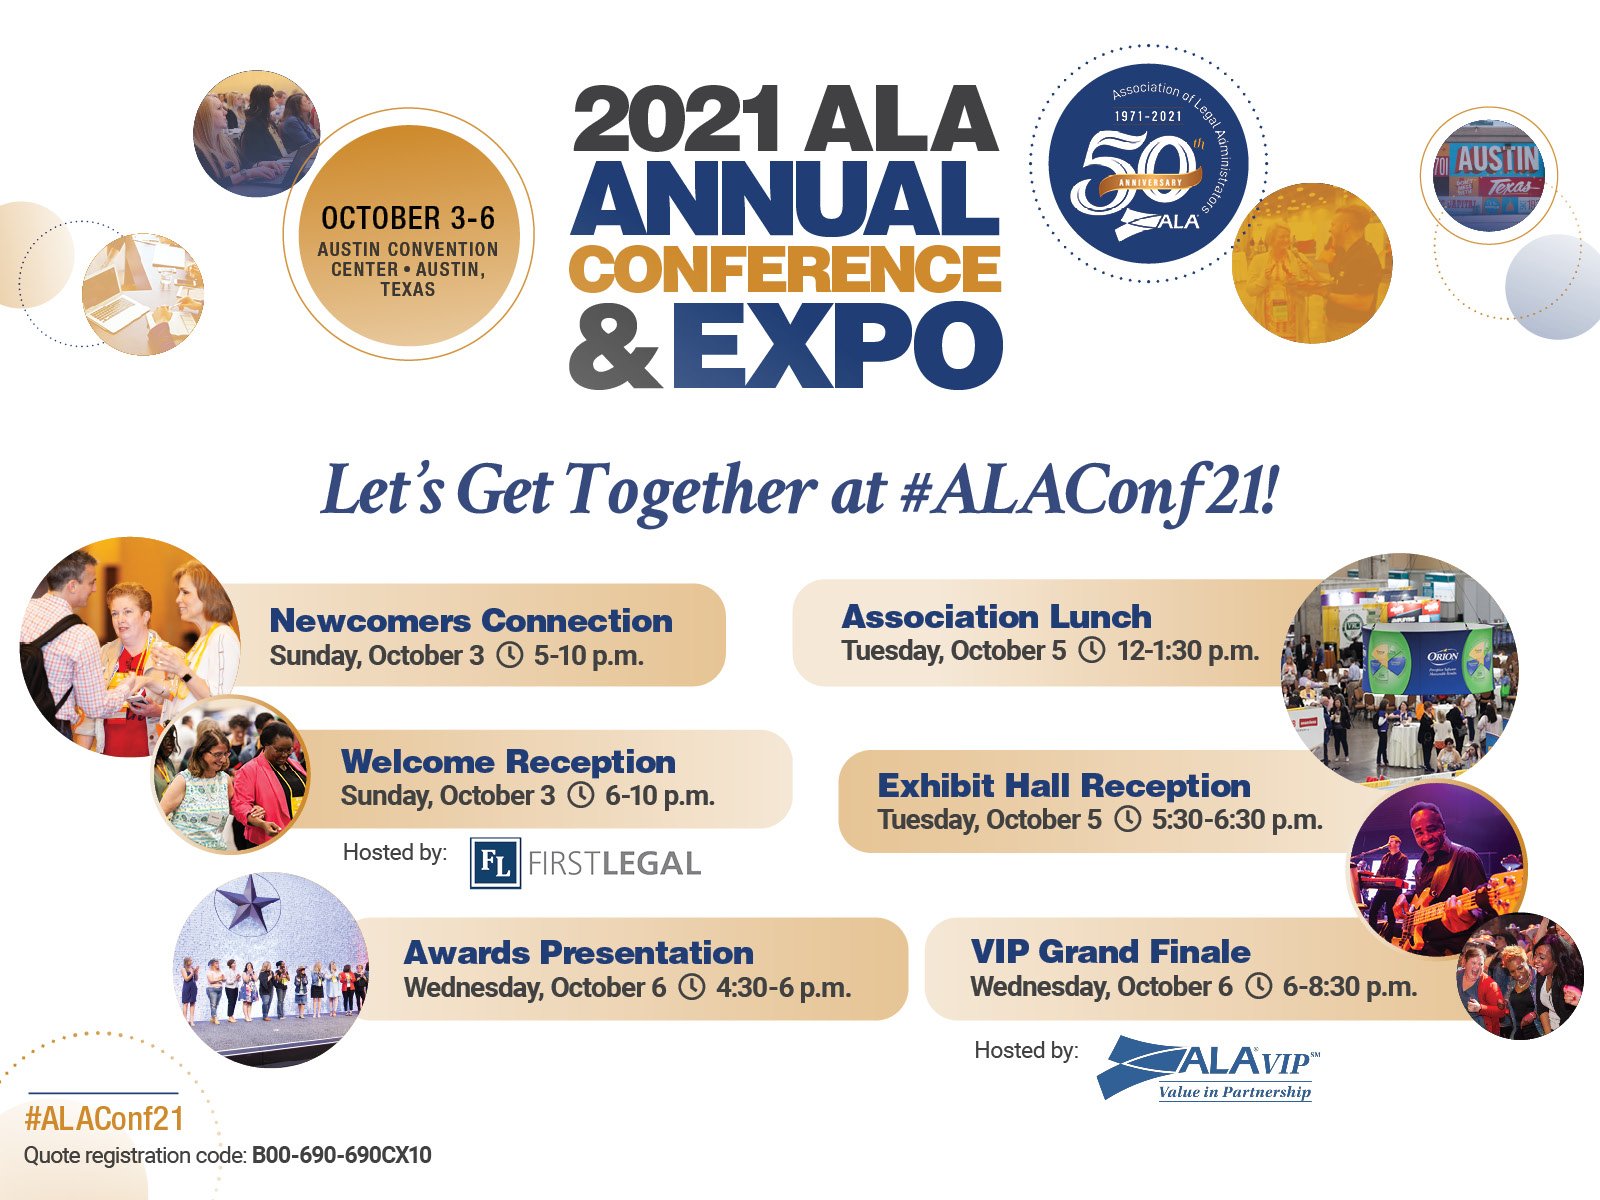 ALA's 2021 Annual Conference & Expo